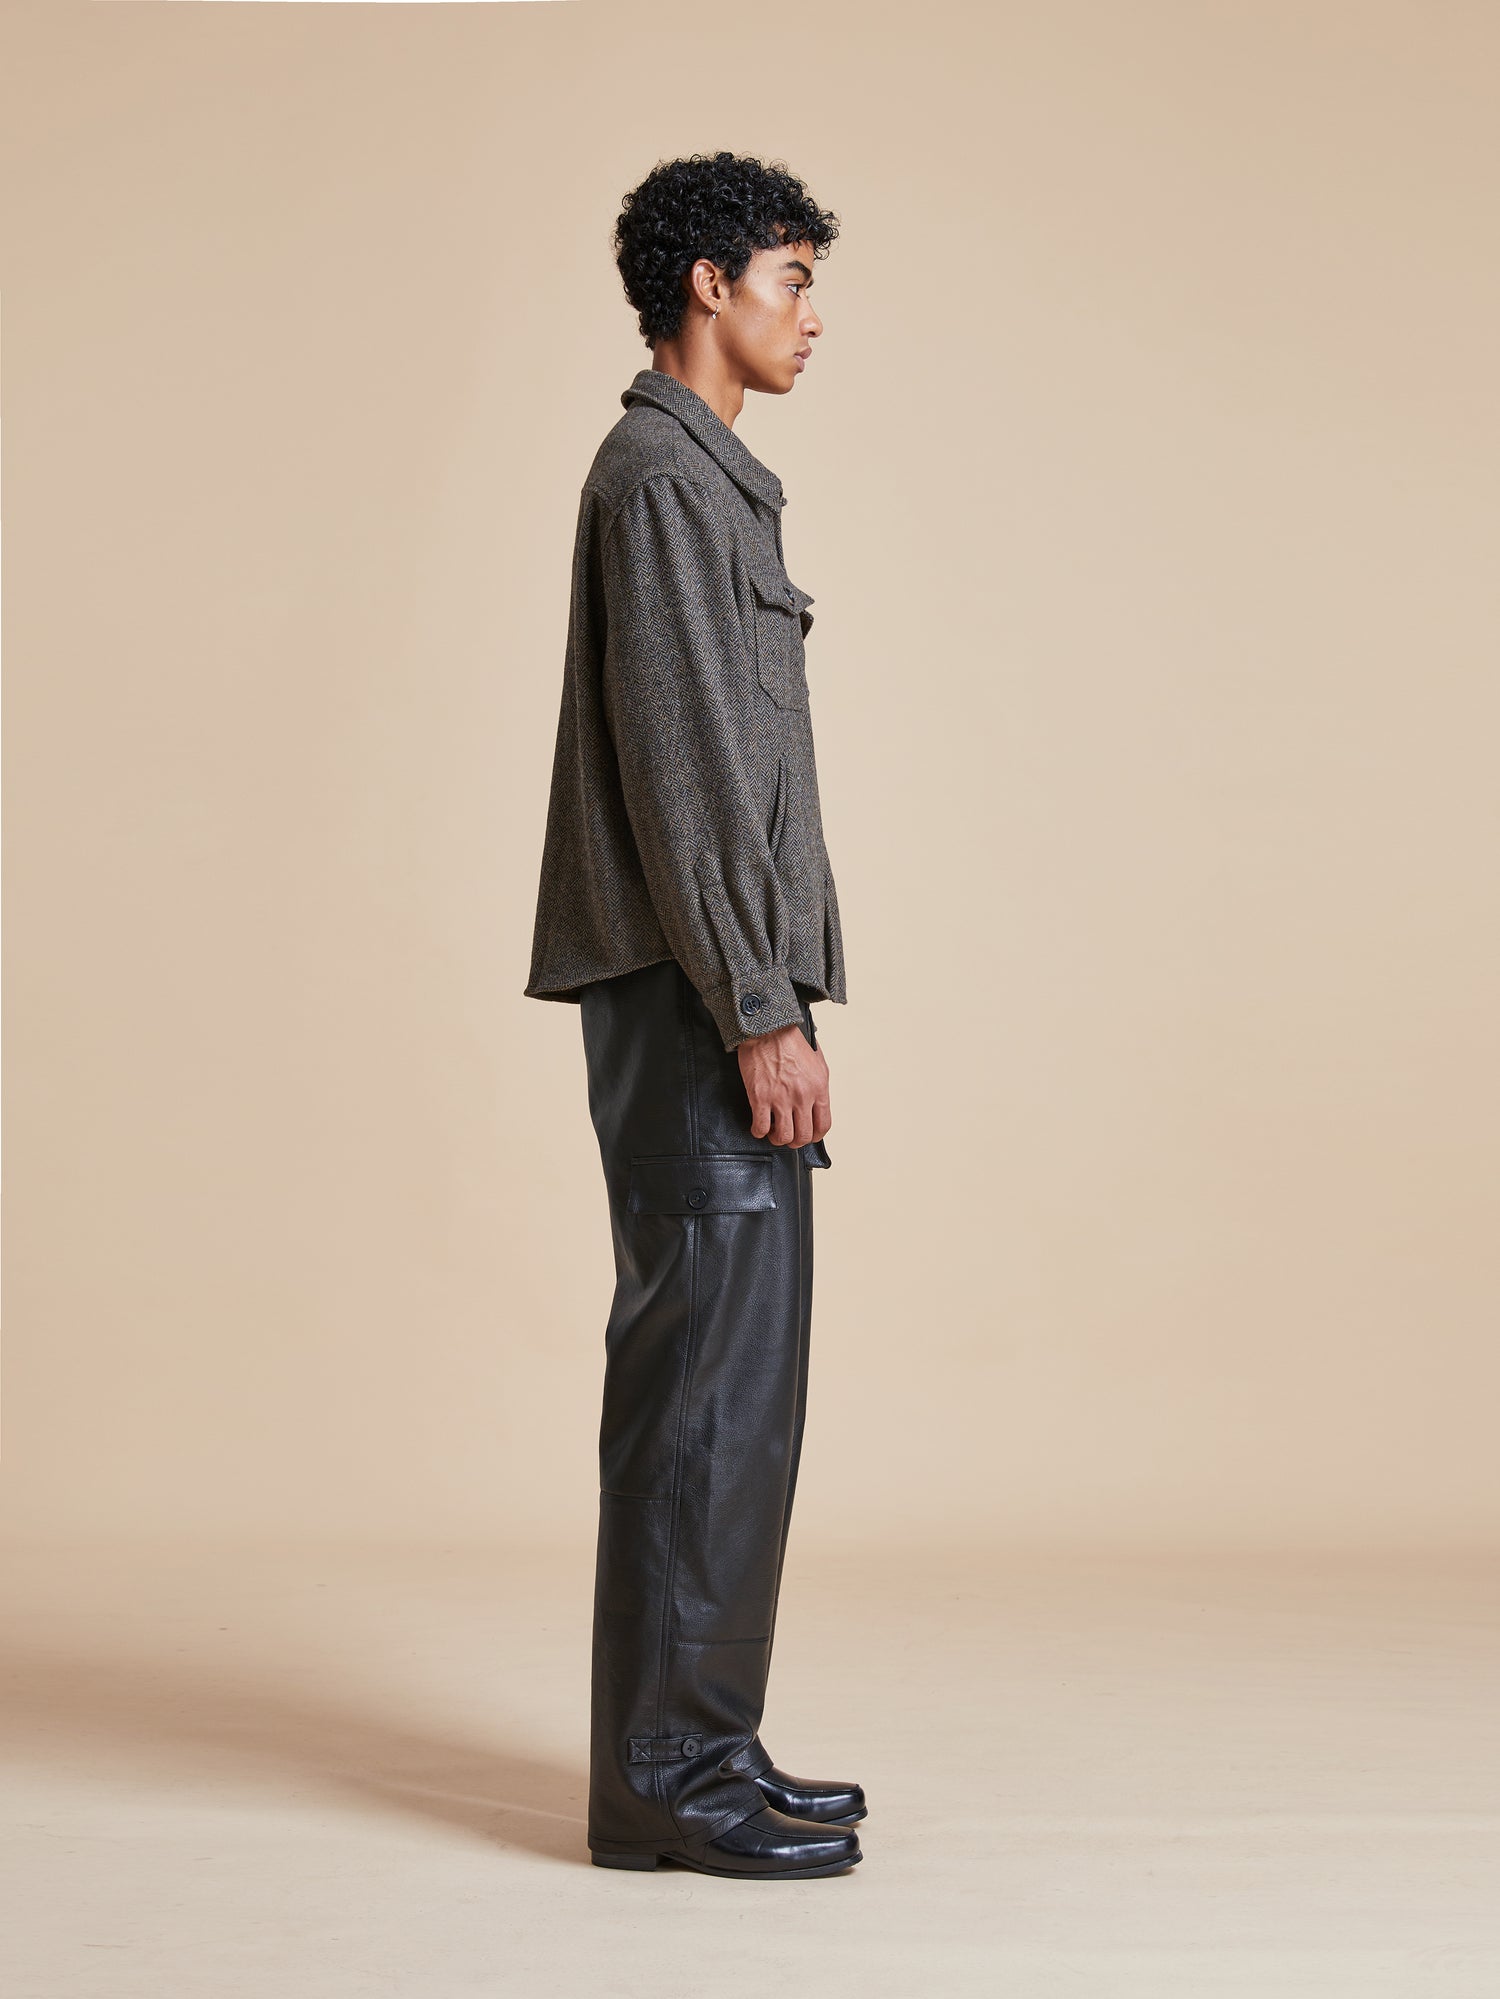 A man wearing black leather pants and a Raven Herringbone Overshirt by Found.